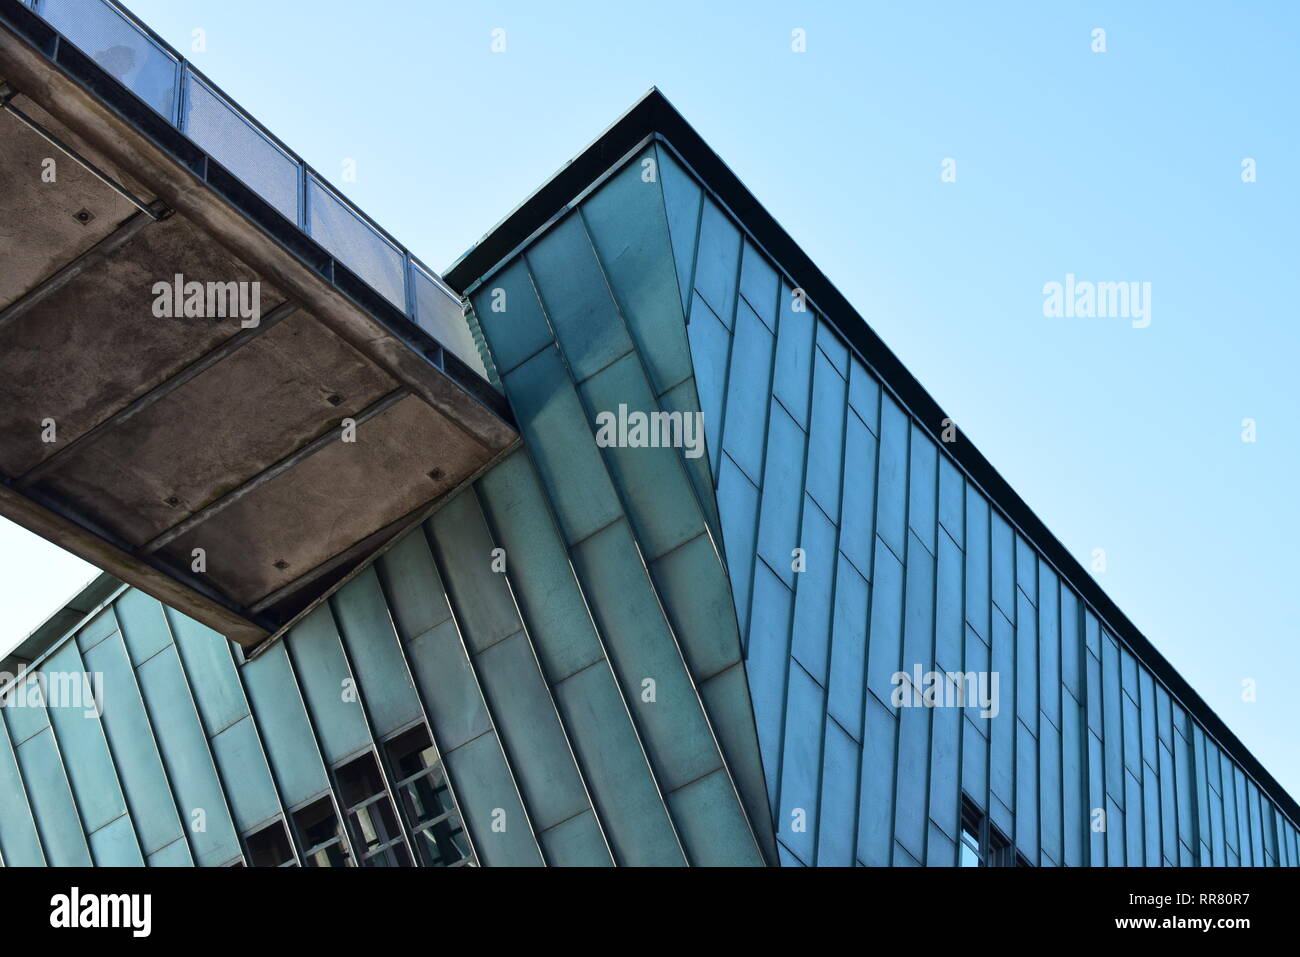 amsterdam science center building detail Stock Photo